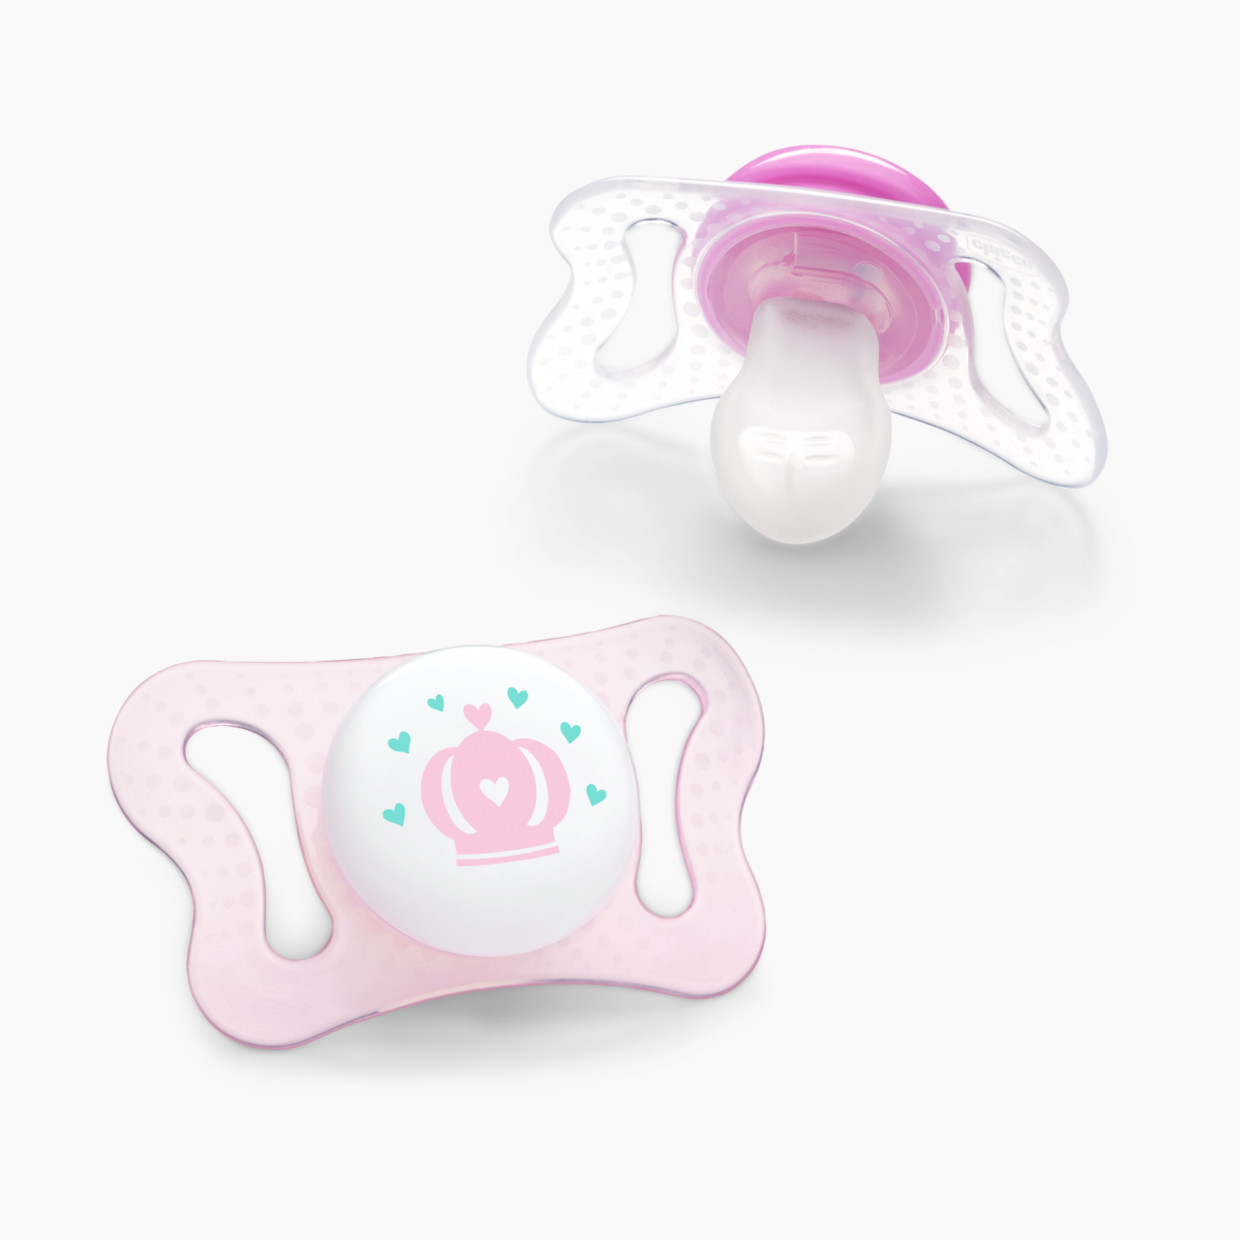 Chicco PhysioForma mi-cro Orthodontic Newborn Pacifier (2-Pack) - Pink, 0-2 Months.